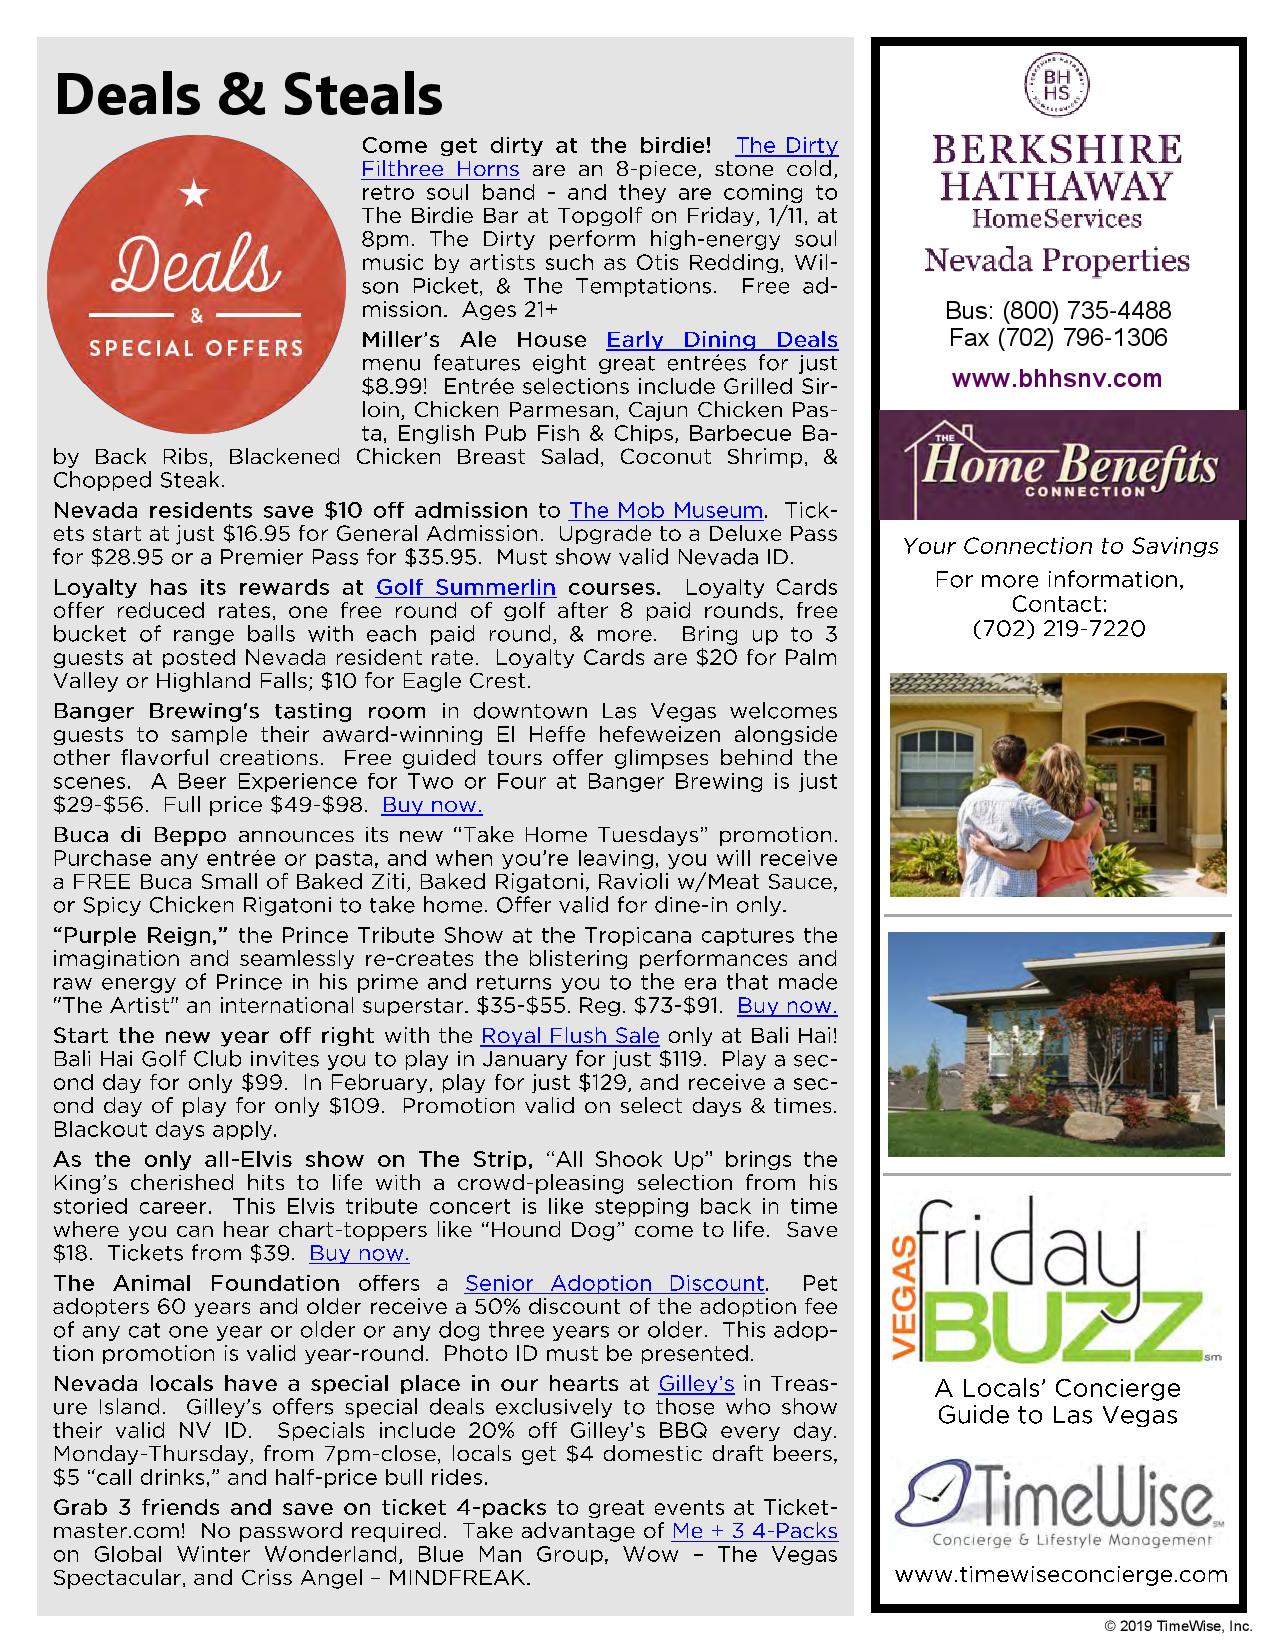 Berkshire-Hathaway-HomeServices-fridaybuzz Jan 11 2019-page-004